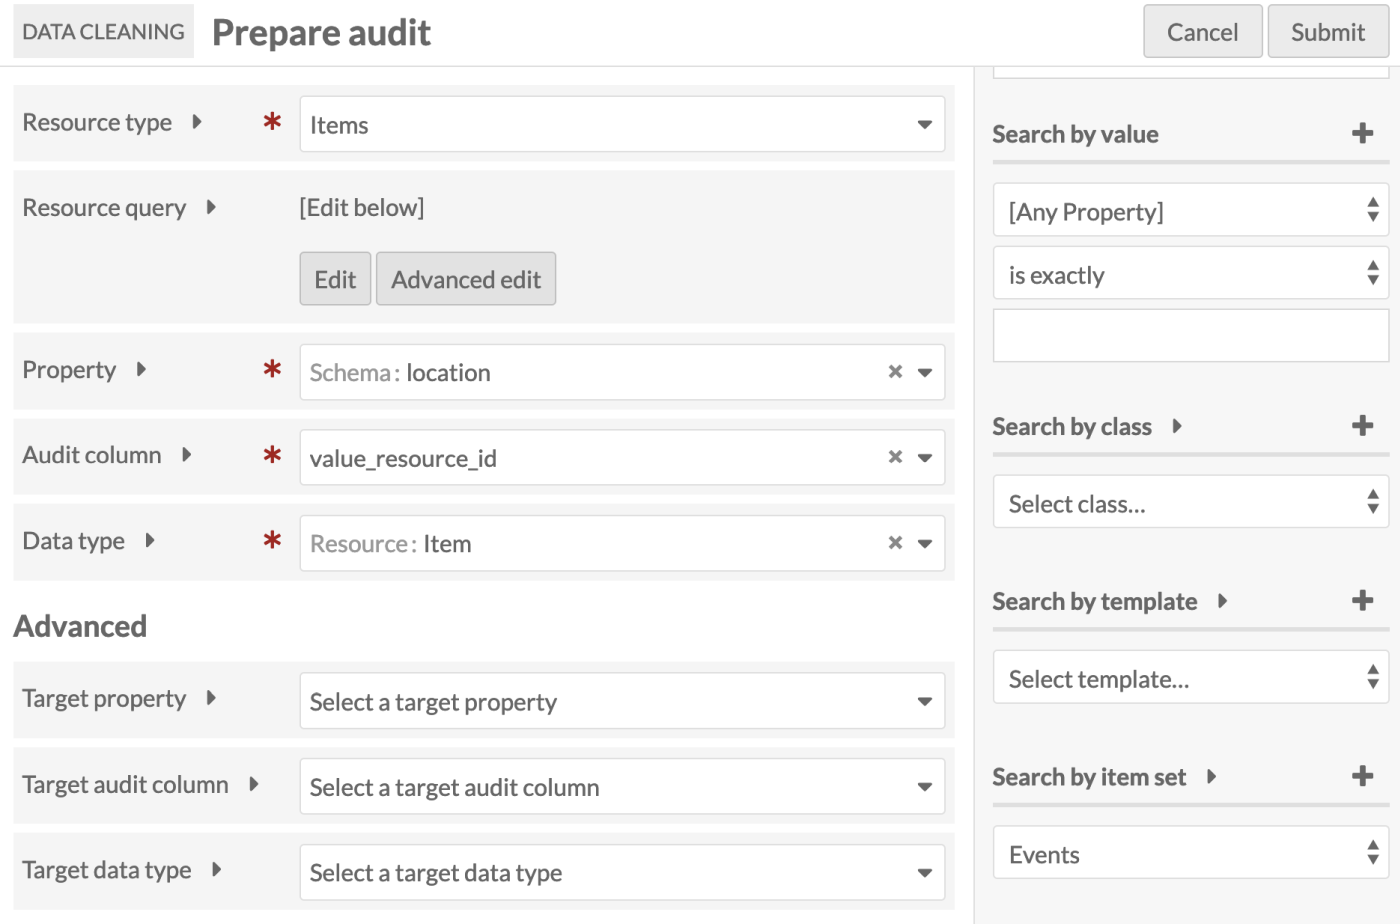 The Prepare Audit screen with Items set as the Resource Type; a Resource Query for Item set Events; the Property set to Schema:location; the Audit column set to value_resource_id;  and the Data type set to Resource